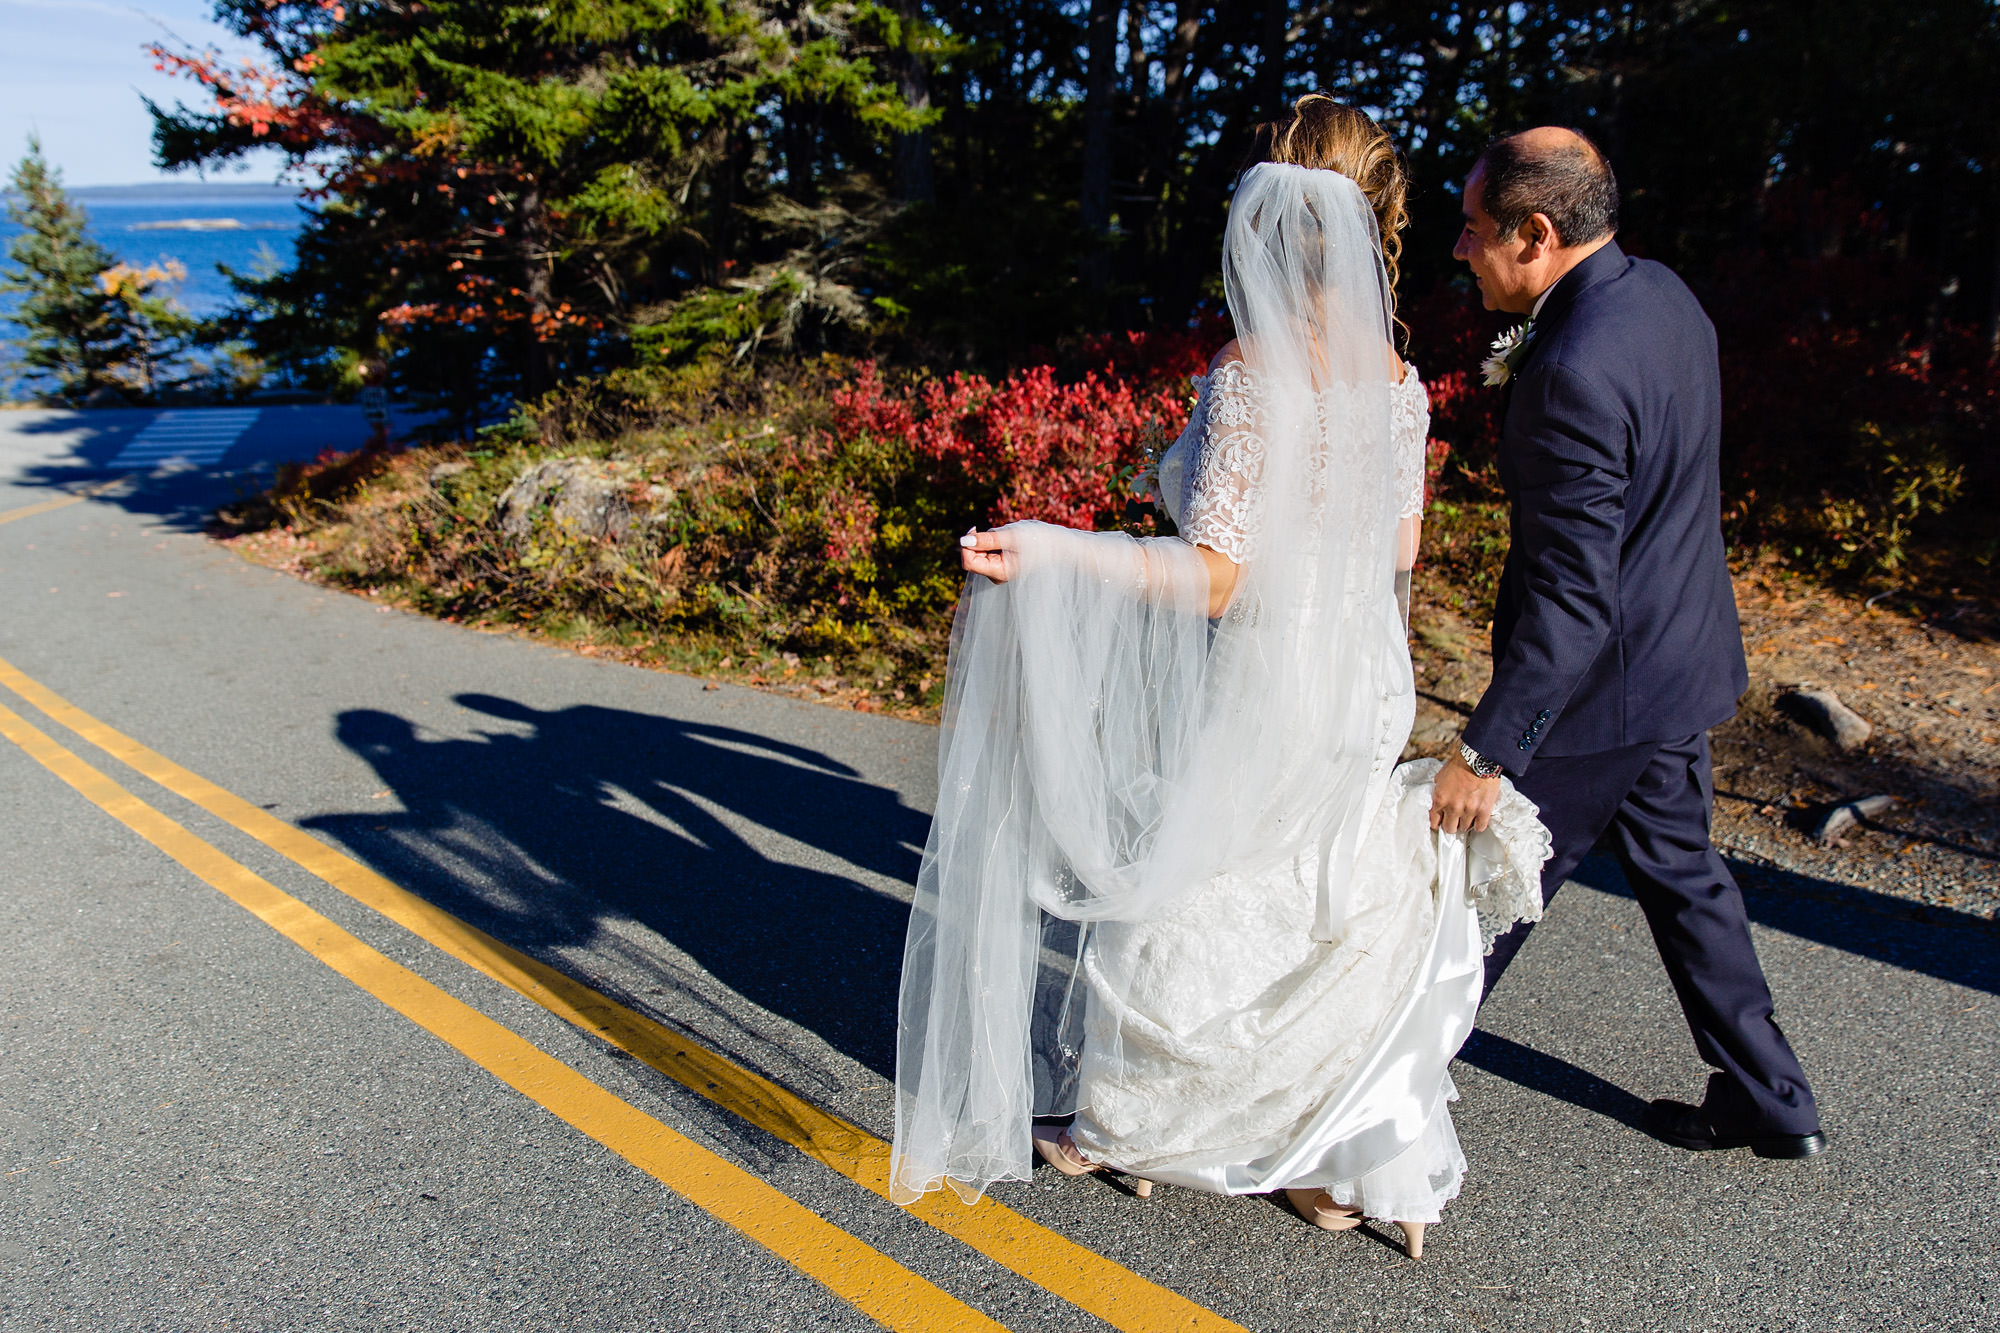 A bride and groom walk toward the cliffs where they will have their wedding ceremony in Acadia